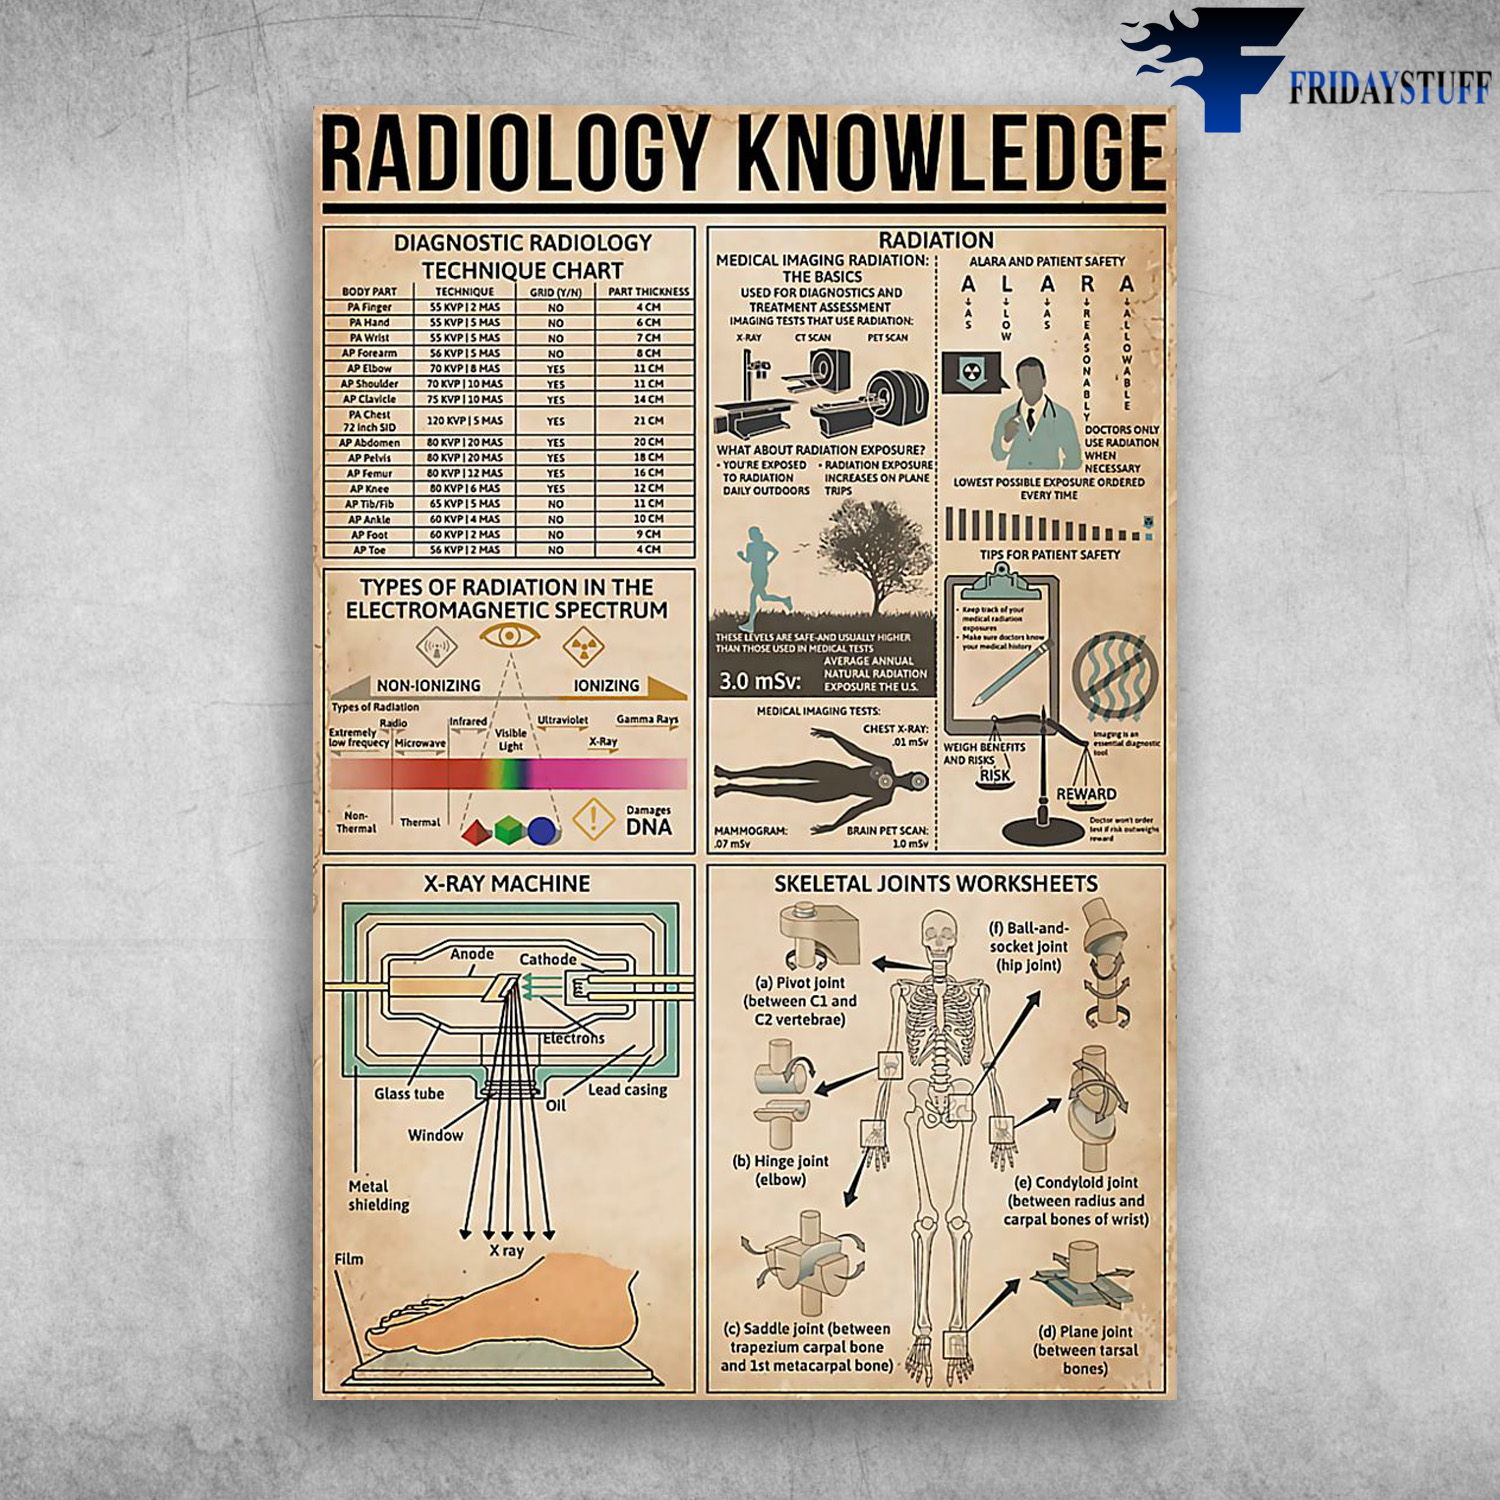 Radiology Knowledge - Diagnostic Radiology Technique Chart